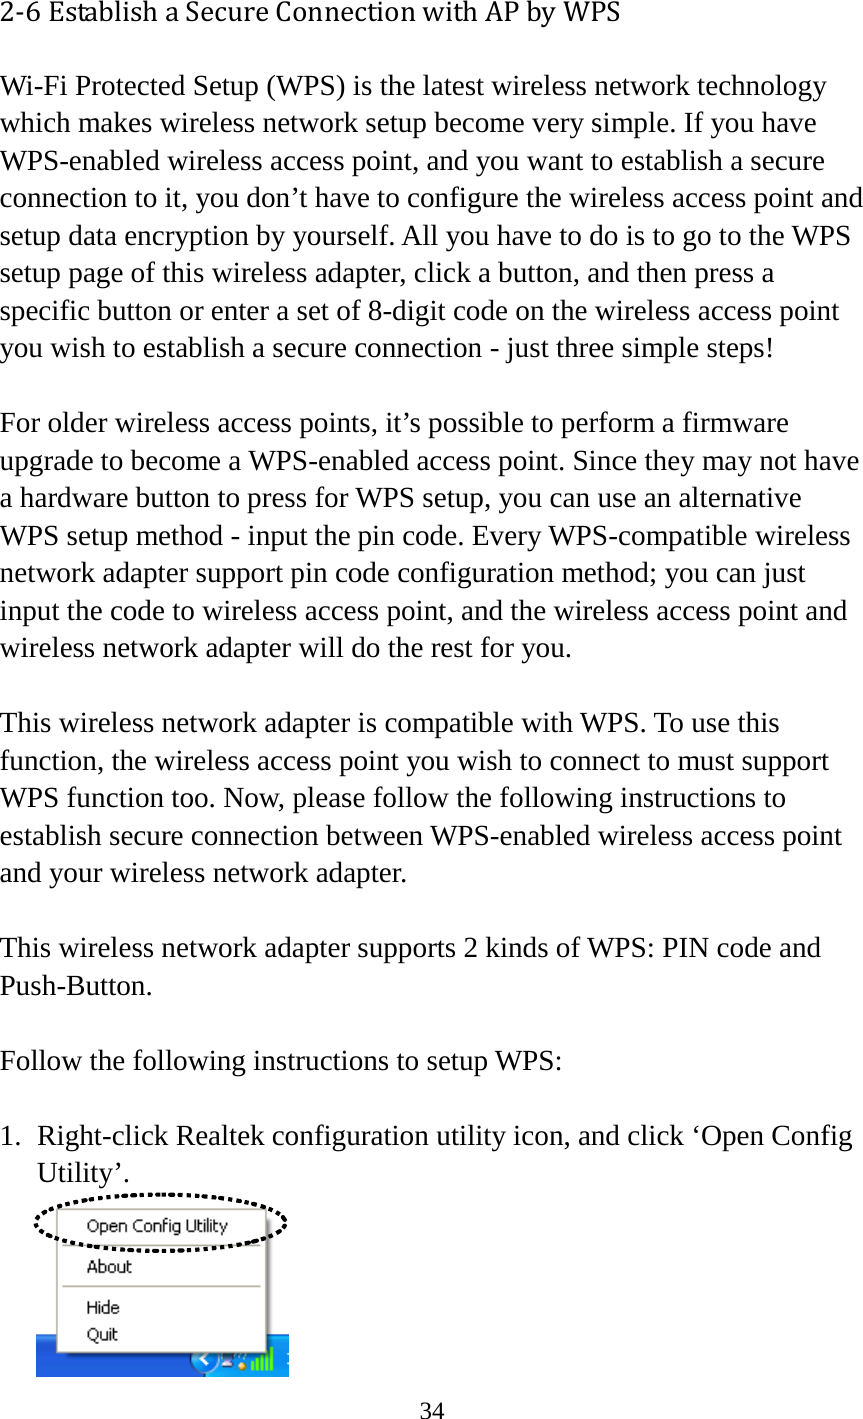 34  2-6 Establish a Secure Connection with AP by WPS Wi-Fi Protected Setup (WPS) is the latest wireless network technology which makes wireless network setup become very simple. If you have WPS-enabled wireless access point, and you want to establish a secure connection to it, you don’t have to configure the wireless access point and setup data encryption by yourself. All you have to do is to go to the WPS setup page of this wireless adapter, click a button, and then press a specific button or enter a set of 8-digit code on the wireless access point you wish to establish a secure connection - just three simple steps!    For older wireless access points, it’s possible to perform a firmware upgrade to become a WPS-enabled access point. Since they may not have a hardware button to press for WPS setup, you can use an alternative WPS setup method - input the pin code. Every WPS-compatible wireless network adapter support pin code configuration method; you can just input the code to wireless access point, and the wireless access point and wireless network adapter will do the rest for you.  This wireless network adapter is compatible with WPS. To use this function, the wireless access point you wish to connect to must support WPS function too. Now, please follow the following instructions to establish secure connection between WPS-enabled wireless access point and your wireless network adapter.  This wireless network adapter supports 2 kinds of WPS: PIN code and Push-Button.    Follow the following instructions to setup WPS:  1. Right-click Realtek configuration utility icon, and click ‘Open Config Utility’.  